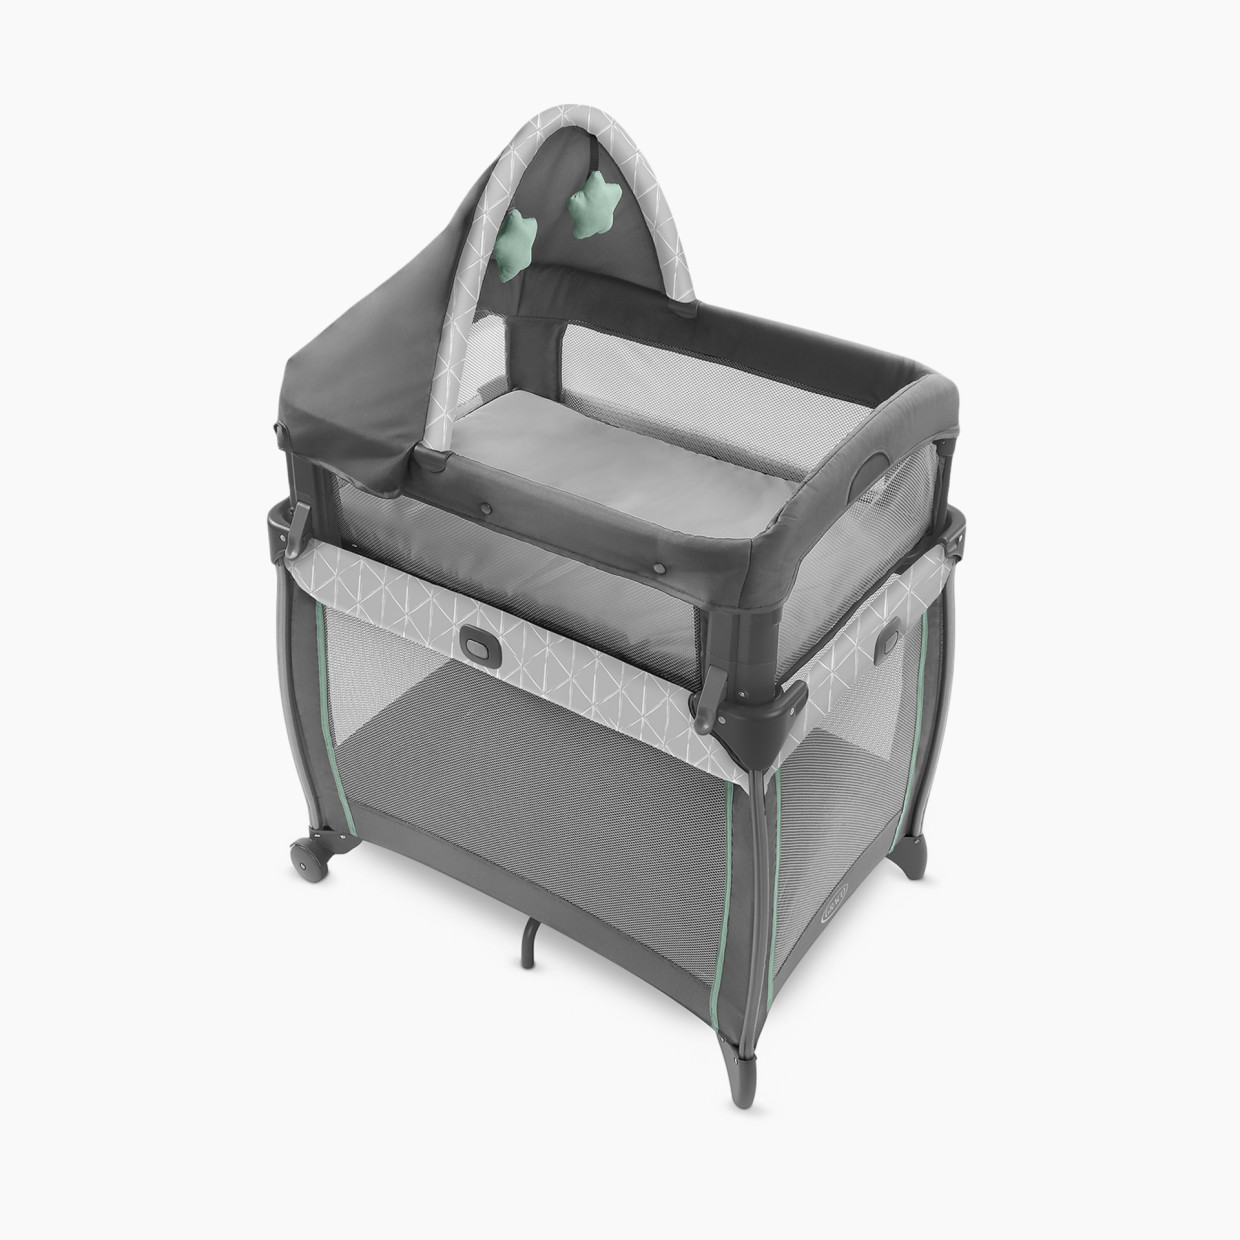 Graco My View 4-in-1 Bassinet - Derby.